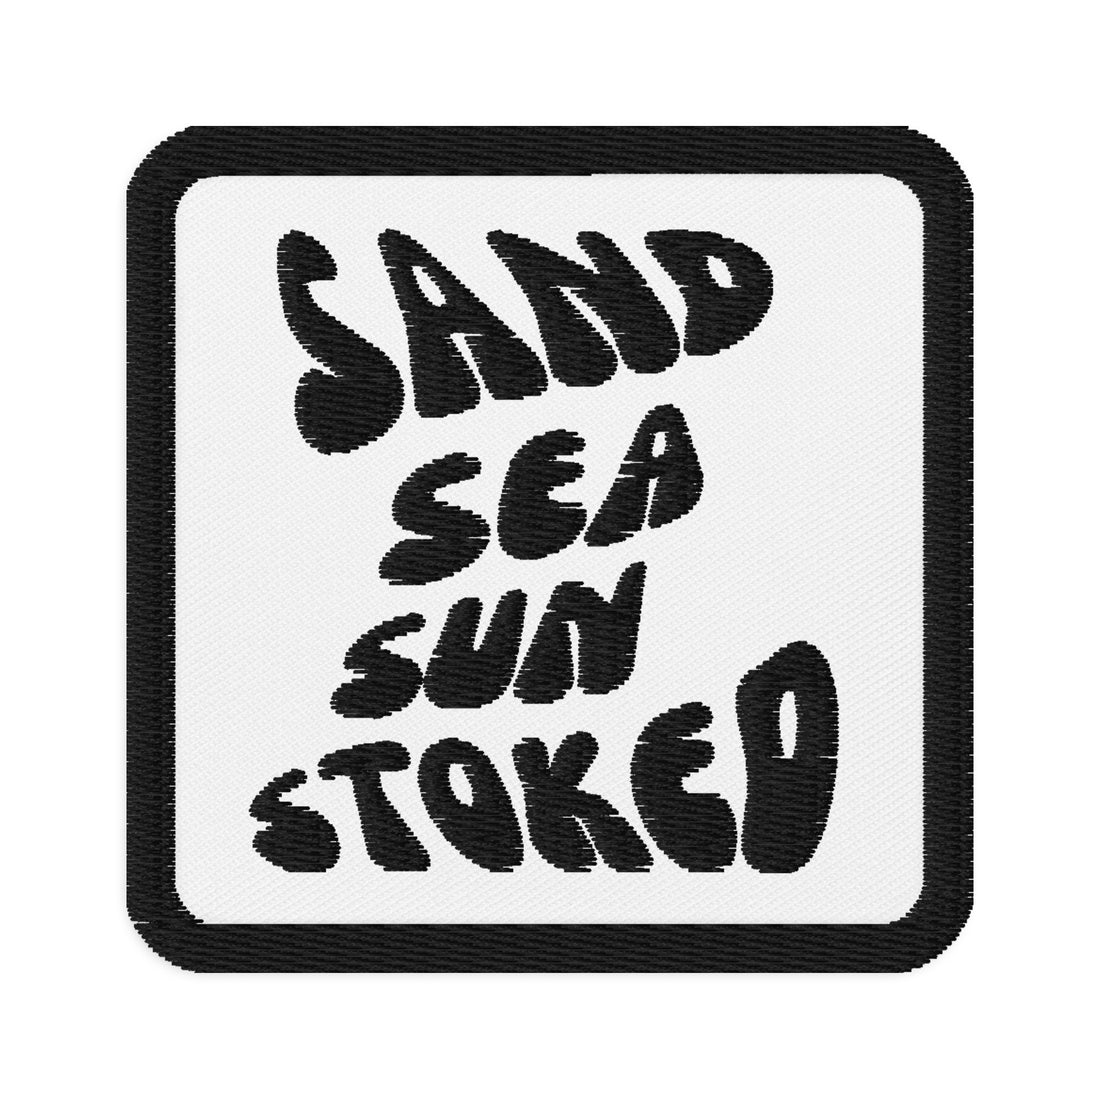 SAND SUN SEA STOKED Embroidered patches